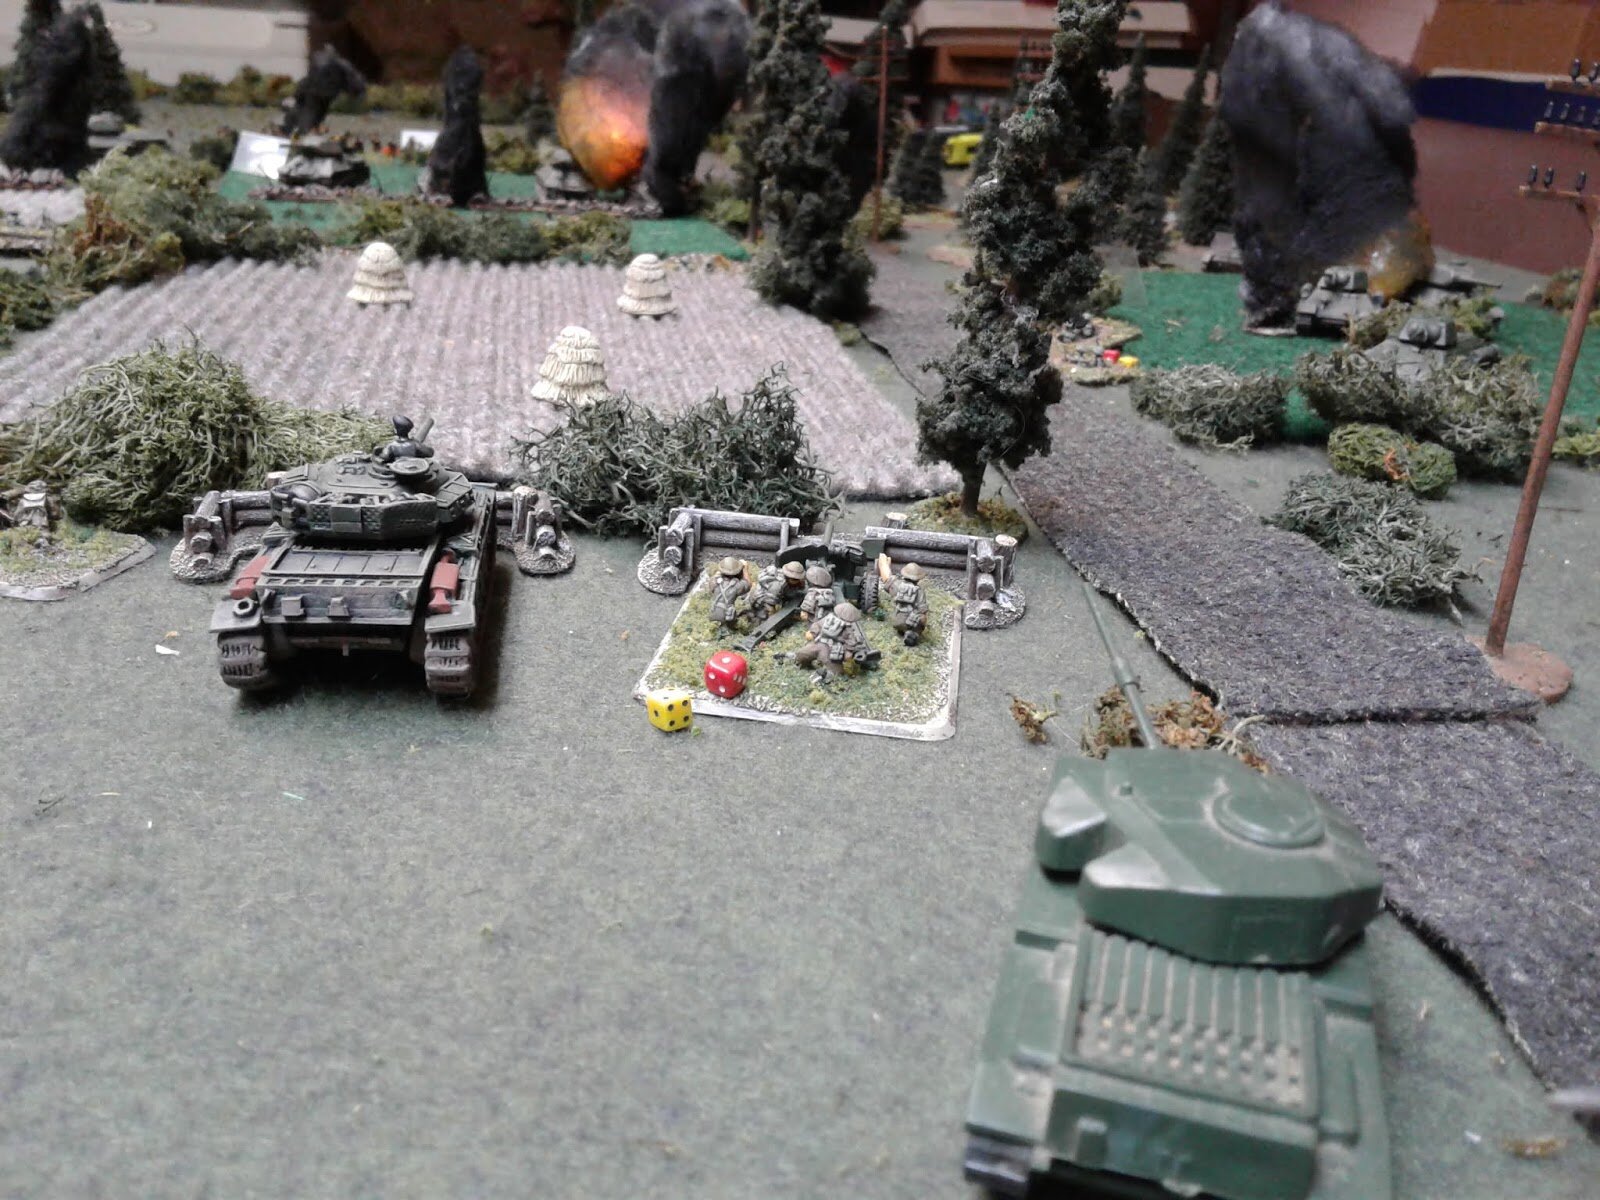 Long range gunnery duel finally gets results. Bordurian 2nd tank platoon is destroyed, one T34 exploding dramatically.